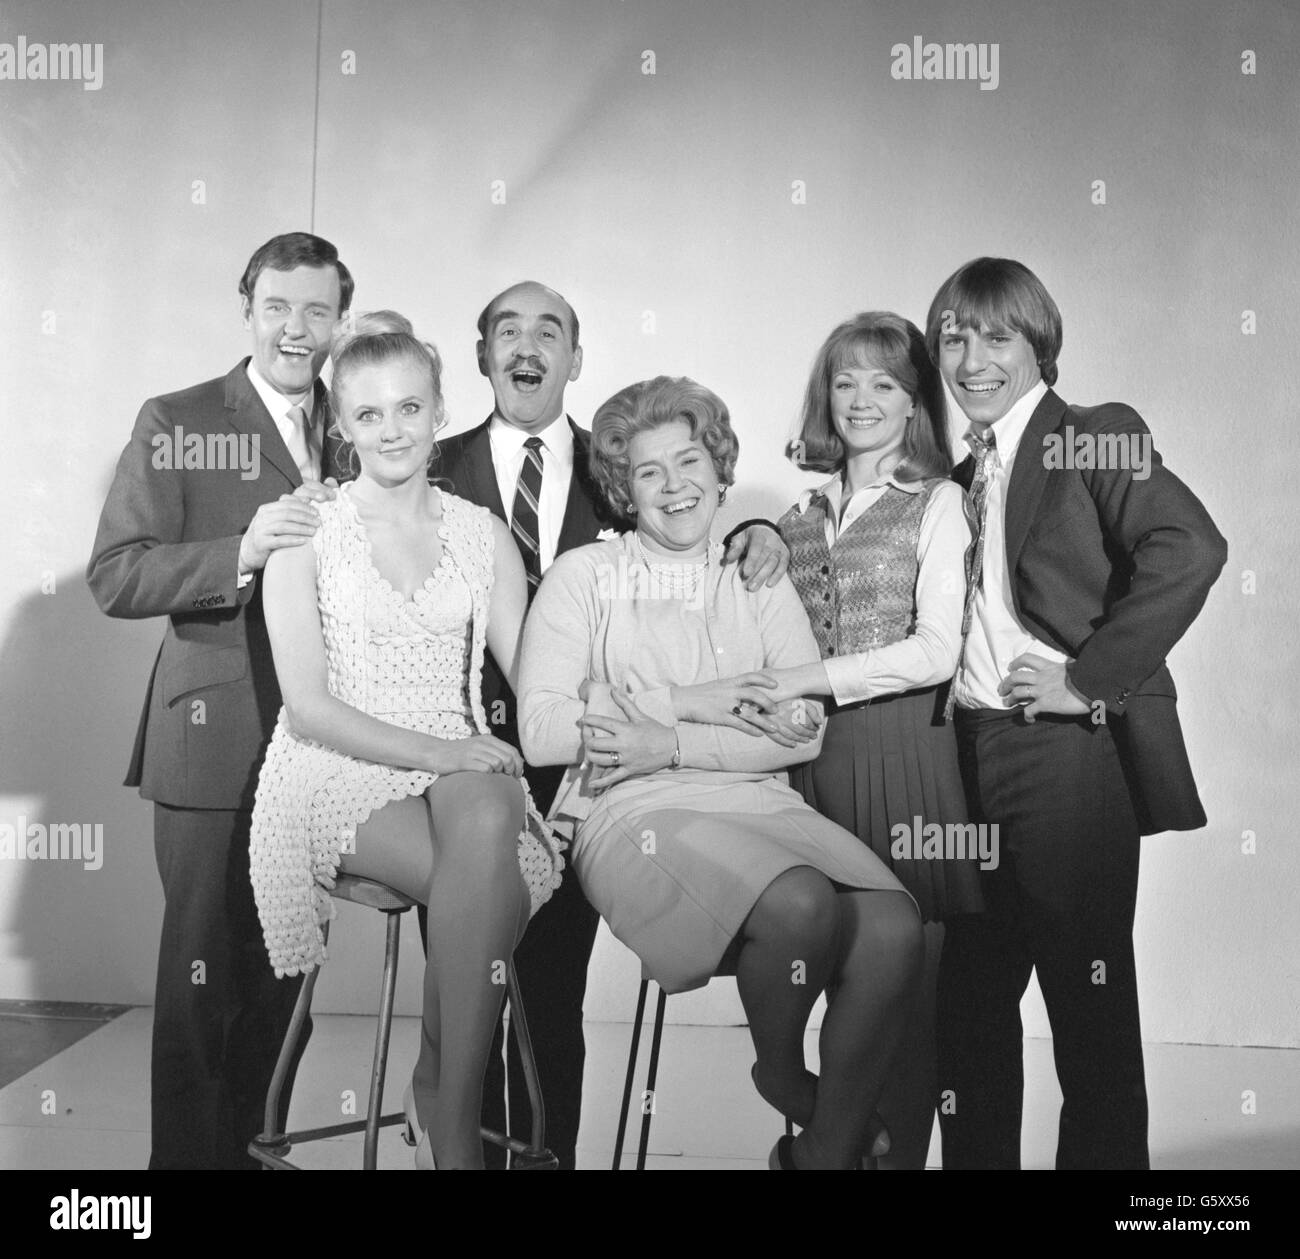 Actor Warren Mitchell, who is set to star in Granada's new film 'All The Way Up', is seen here with members of his new onscreen family, from left, Richard Briers (Son-in-law), Vanessa Howard (Daughter), Pay Heywood (Wife), Elaine Taylor (Daughter) and Kenneth Cranham (Son). The film opens at London's Plaza Theatre on June 11th and has also been selected to open ABC's streamlined twin-cinema in Bournemouth on June 13th. Stock Photo